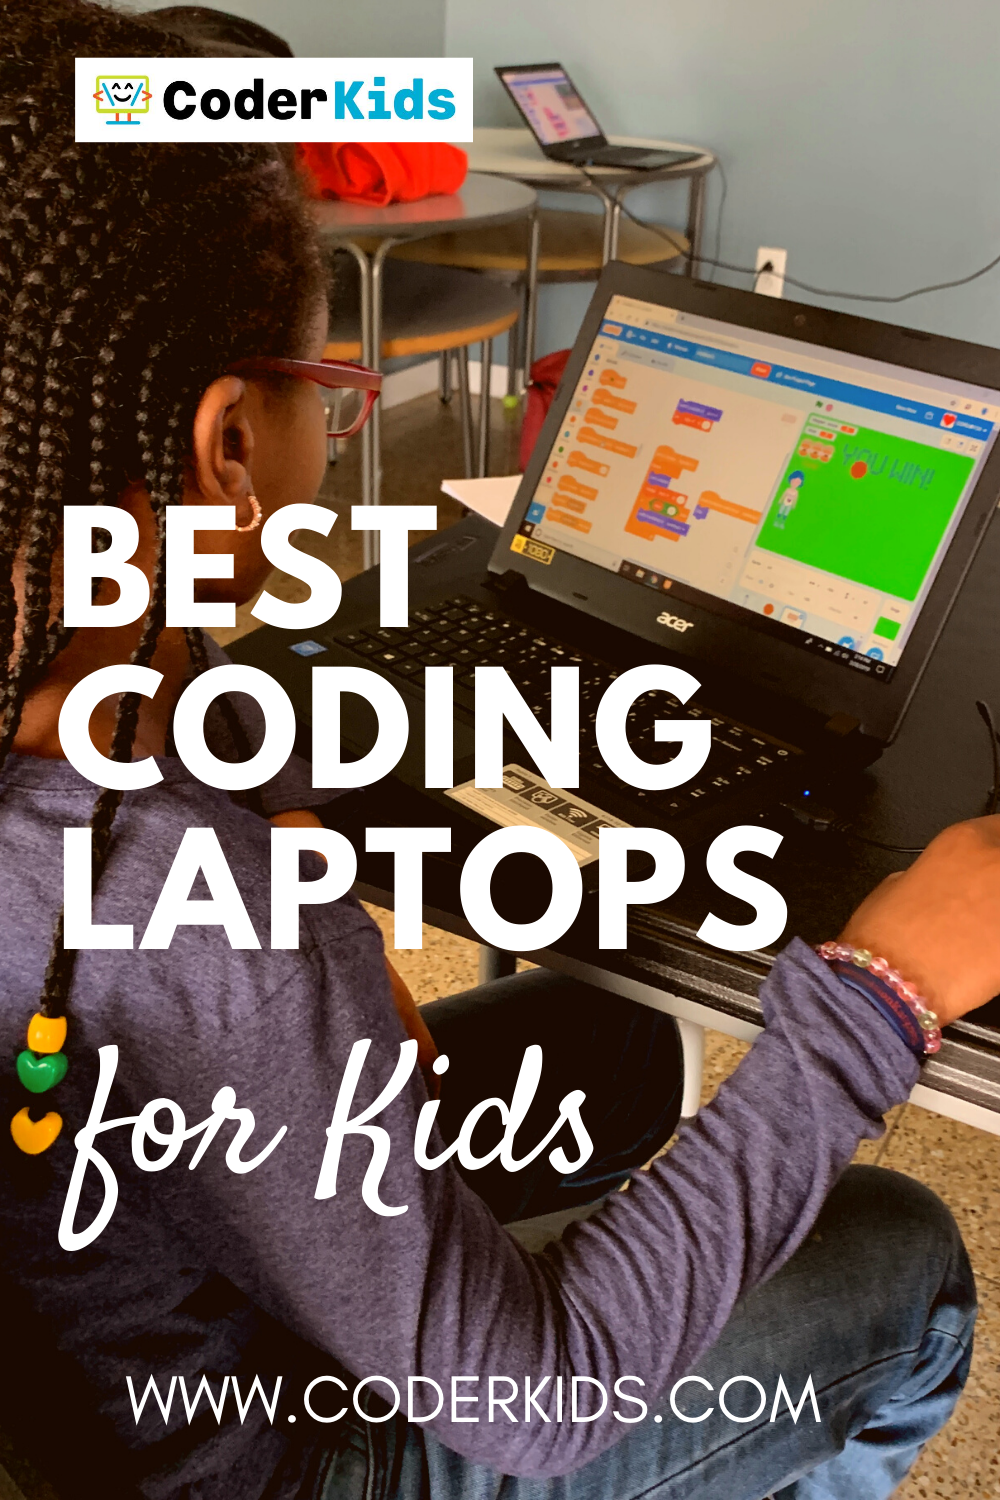 The 3 Best Coding Laptops To Buy Your Child Coder Kids Houston